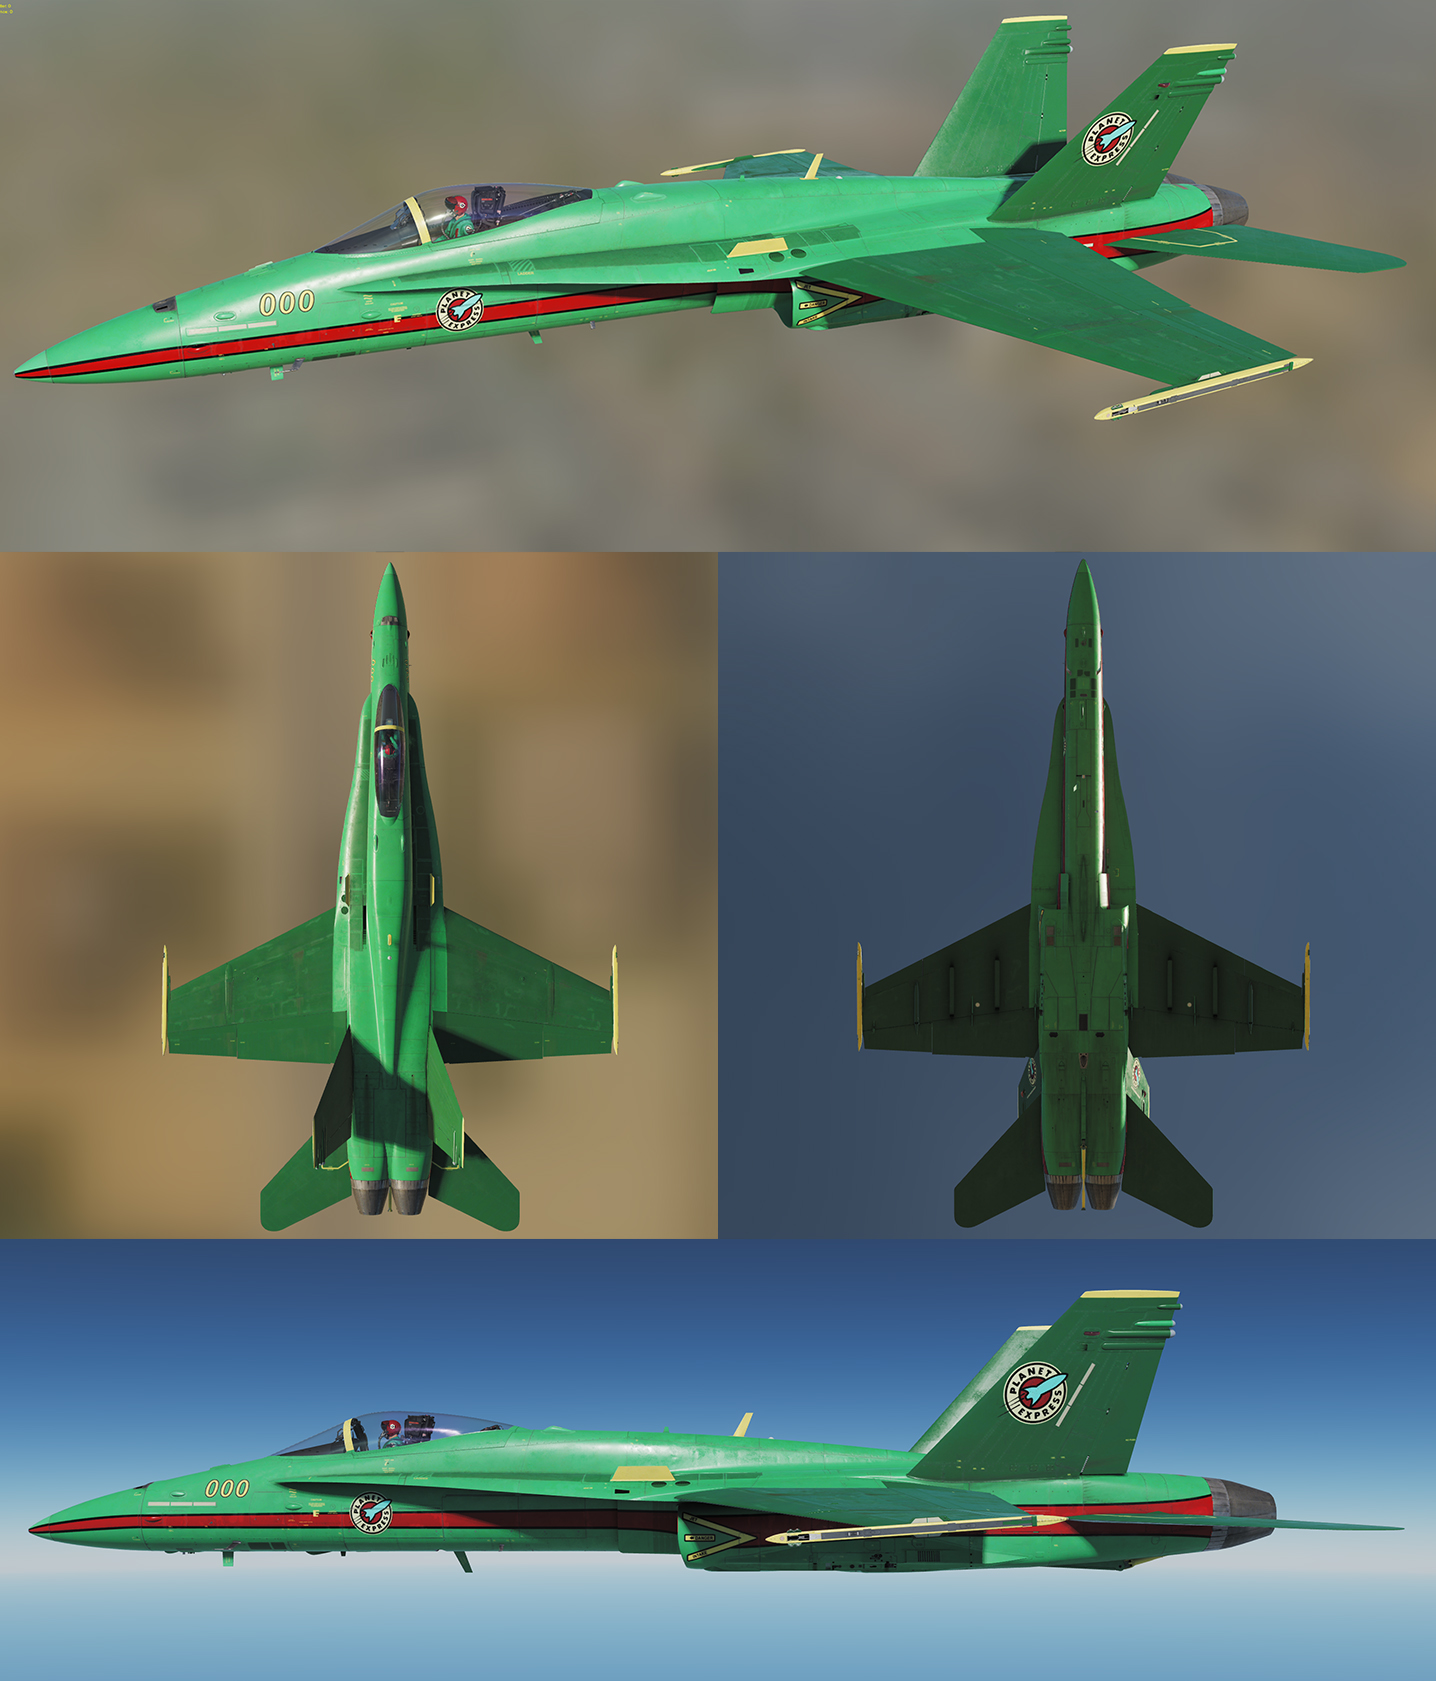  F-18 Racing Livery: Planet Express